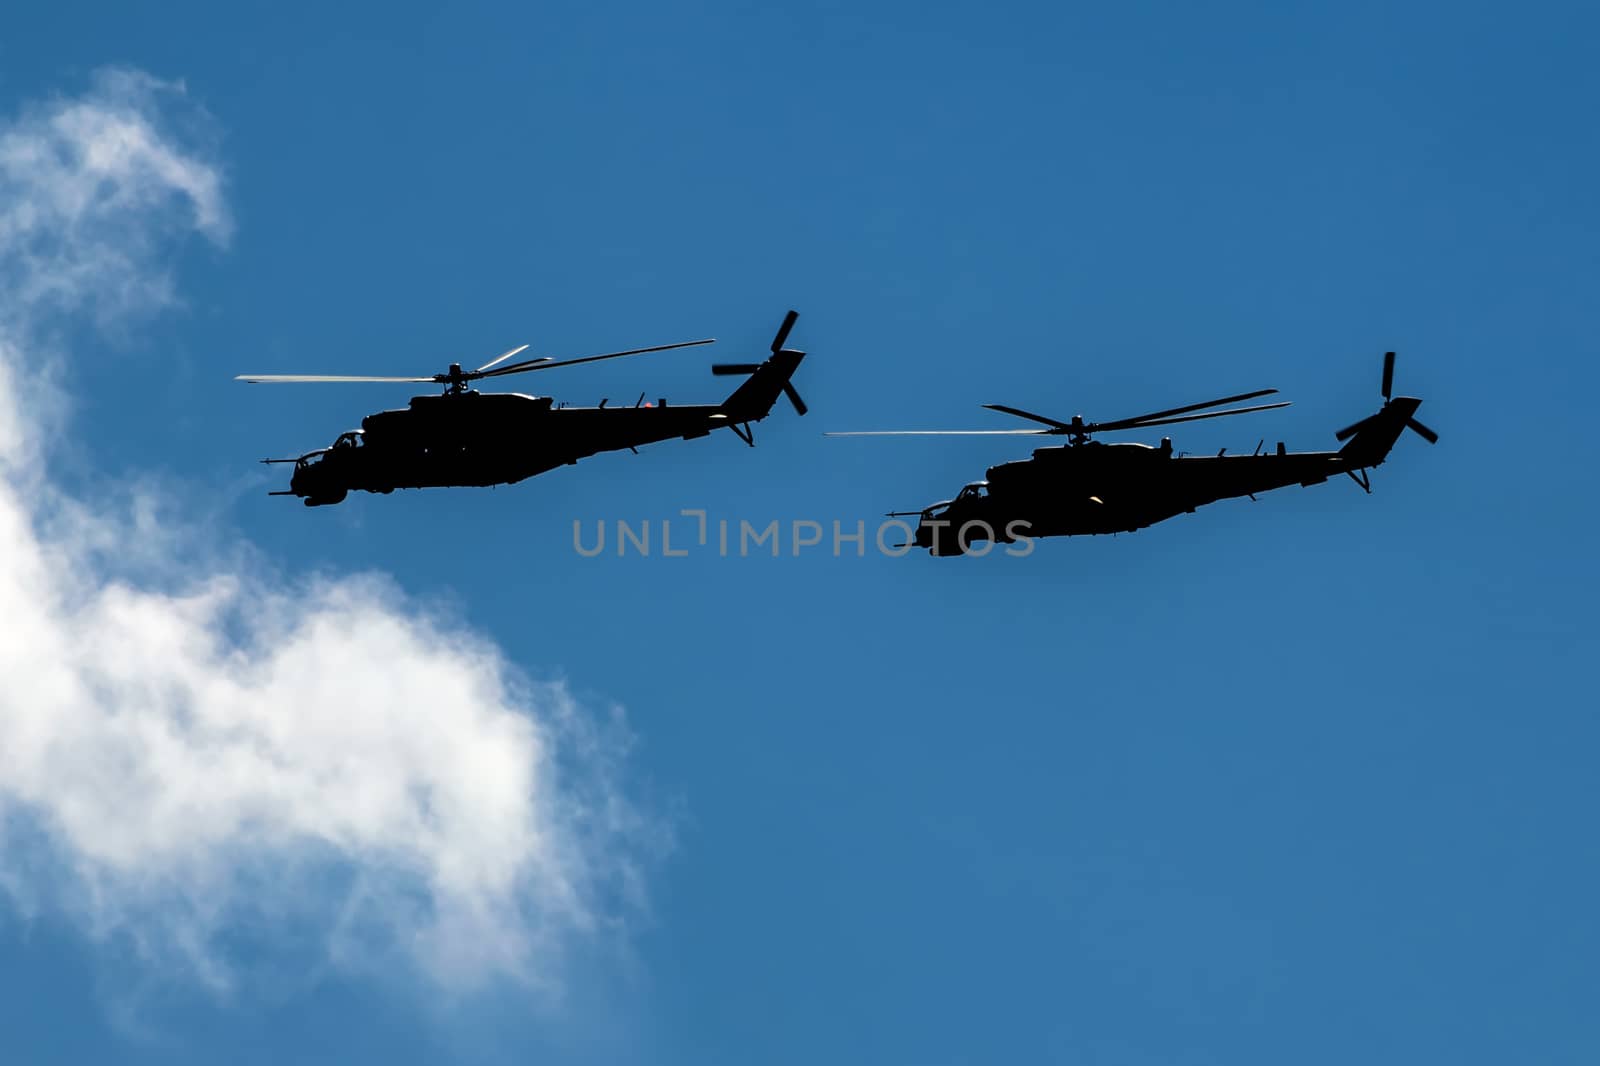 Two combat helicopters silhouettes flying in formation by Attila